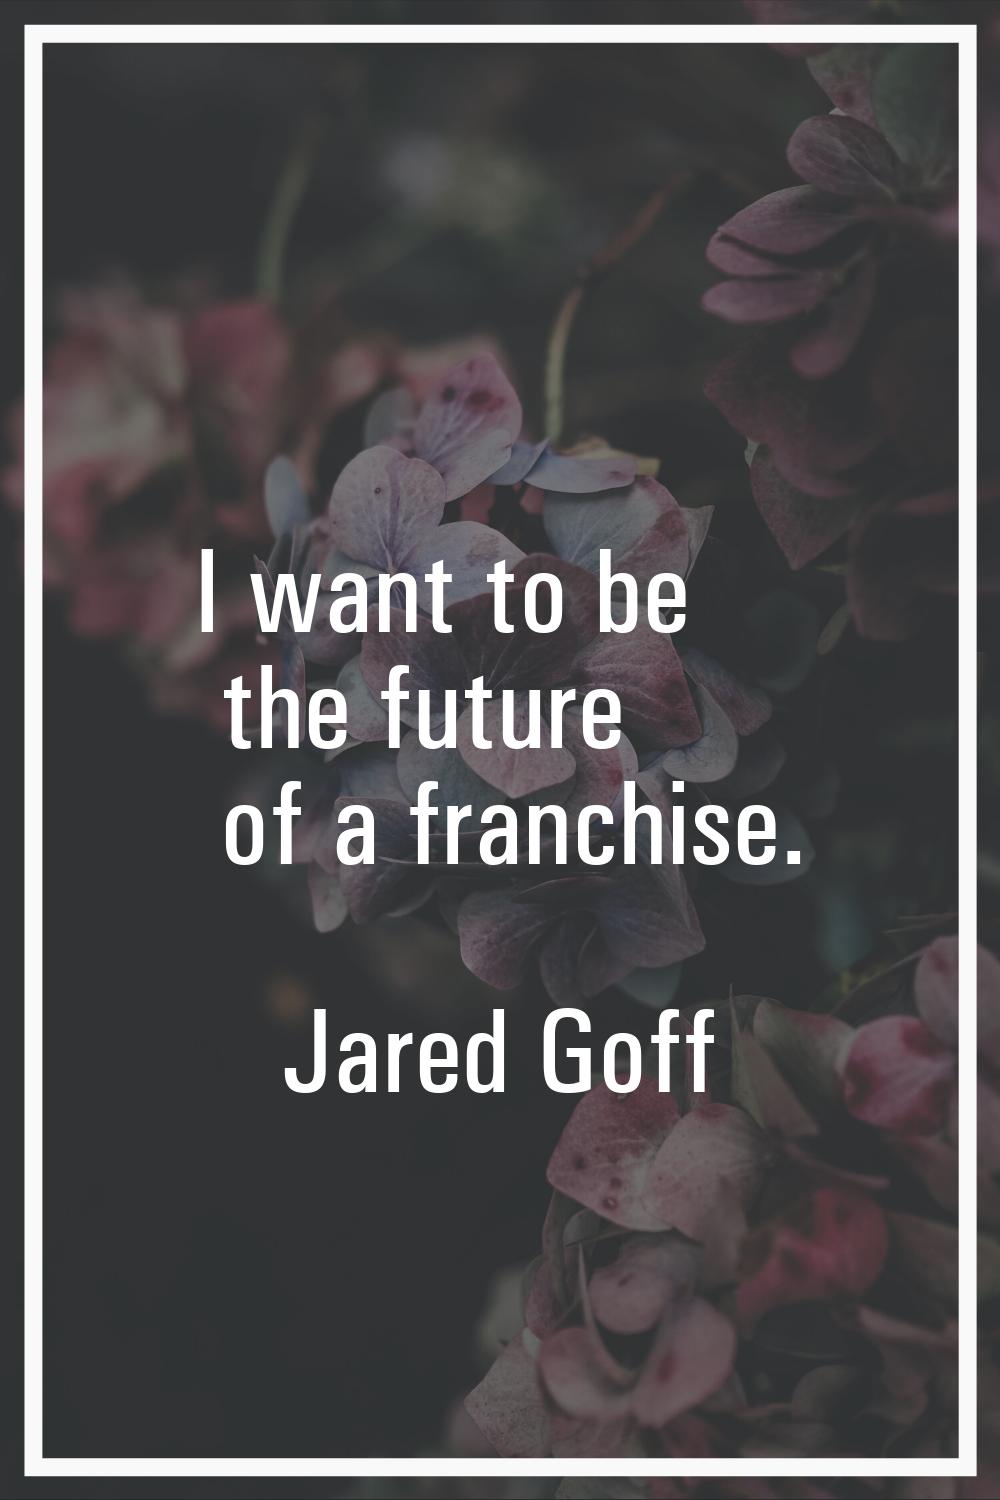 I want to be the future of a franchise.